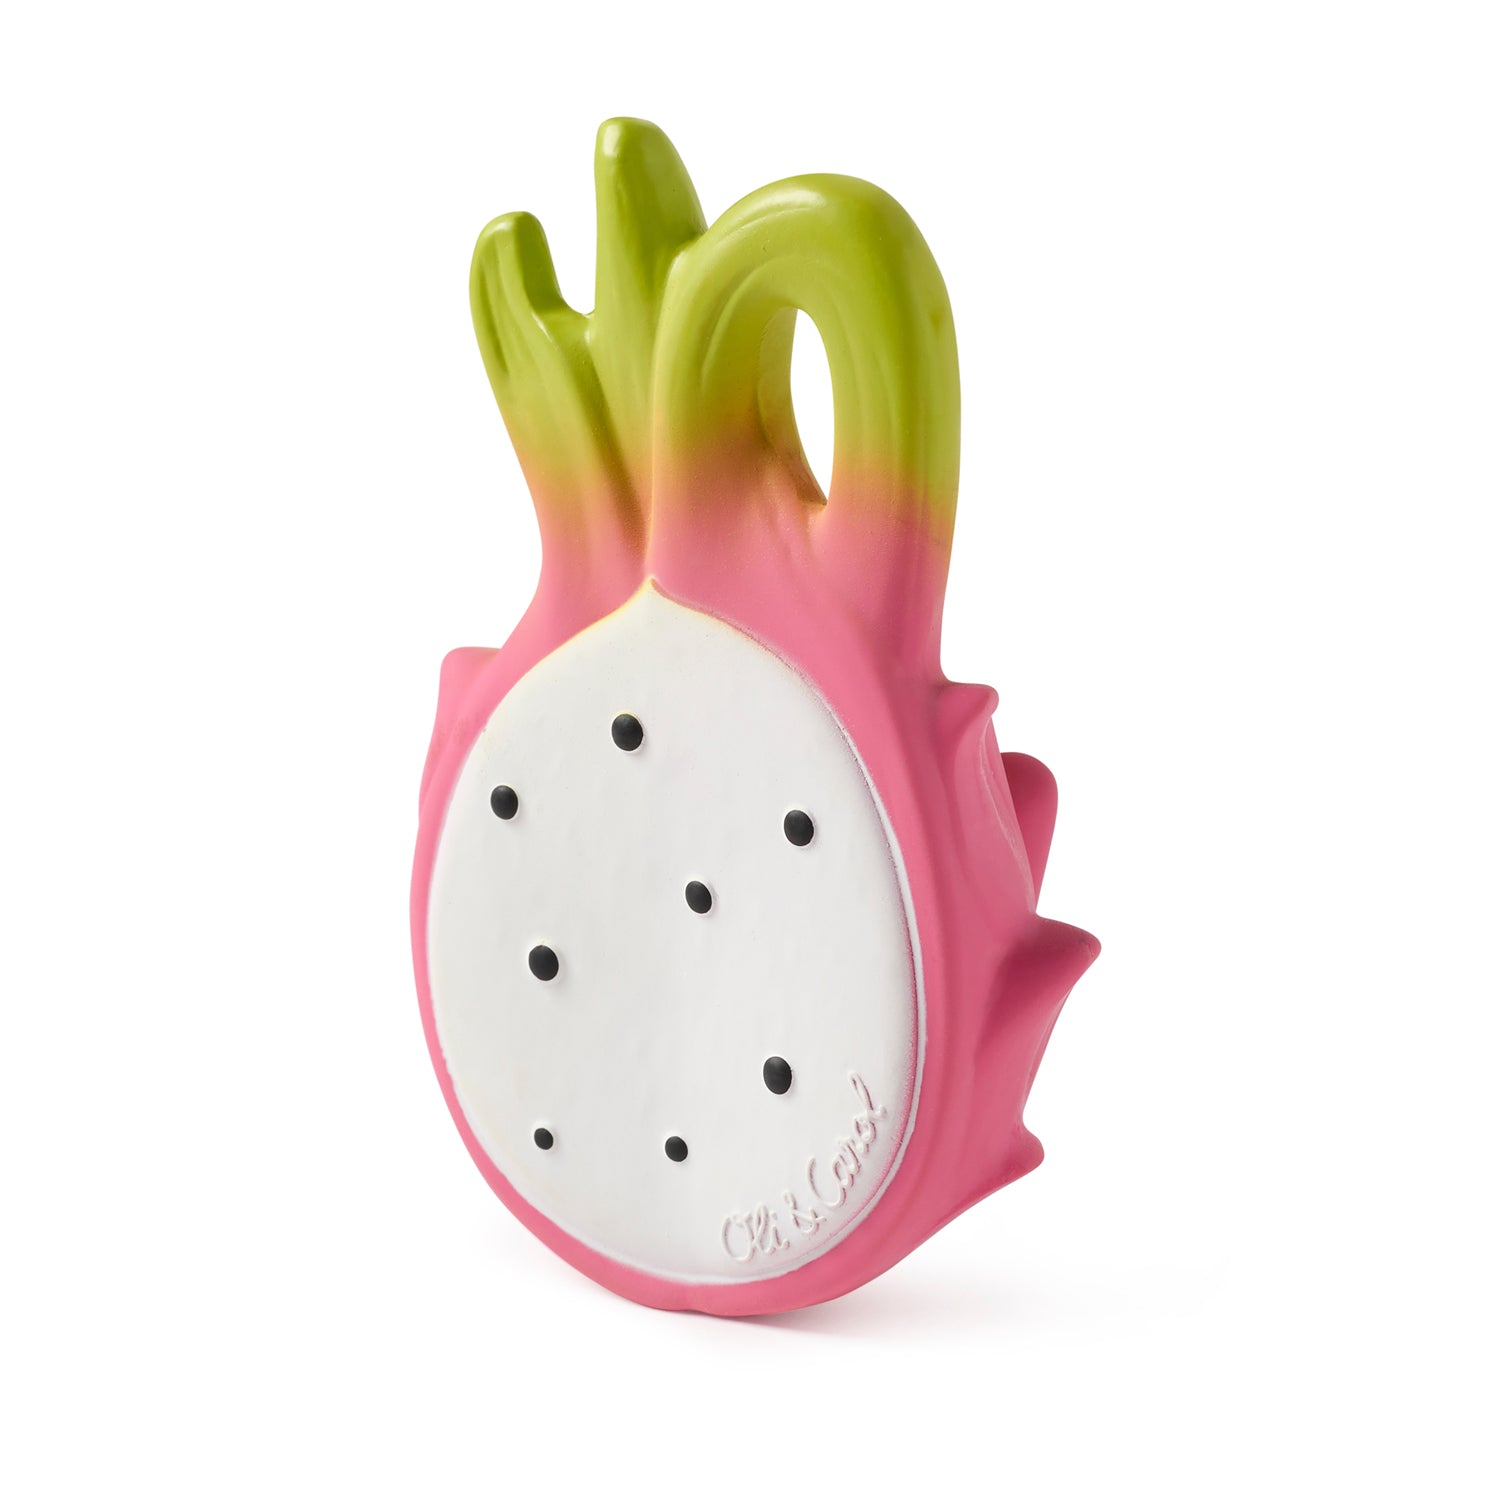 Ice Cream Cone Shaped Baby Teether - Pretty Pink